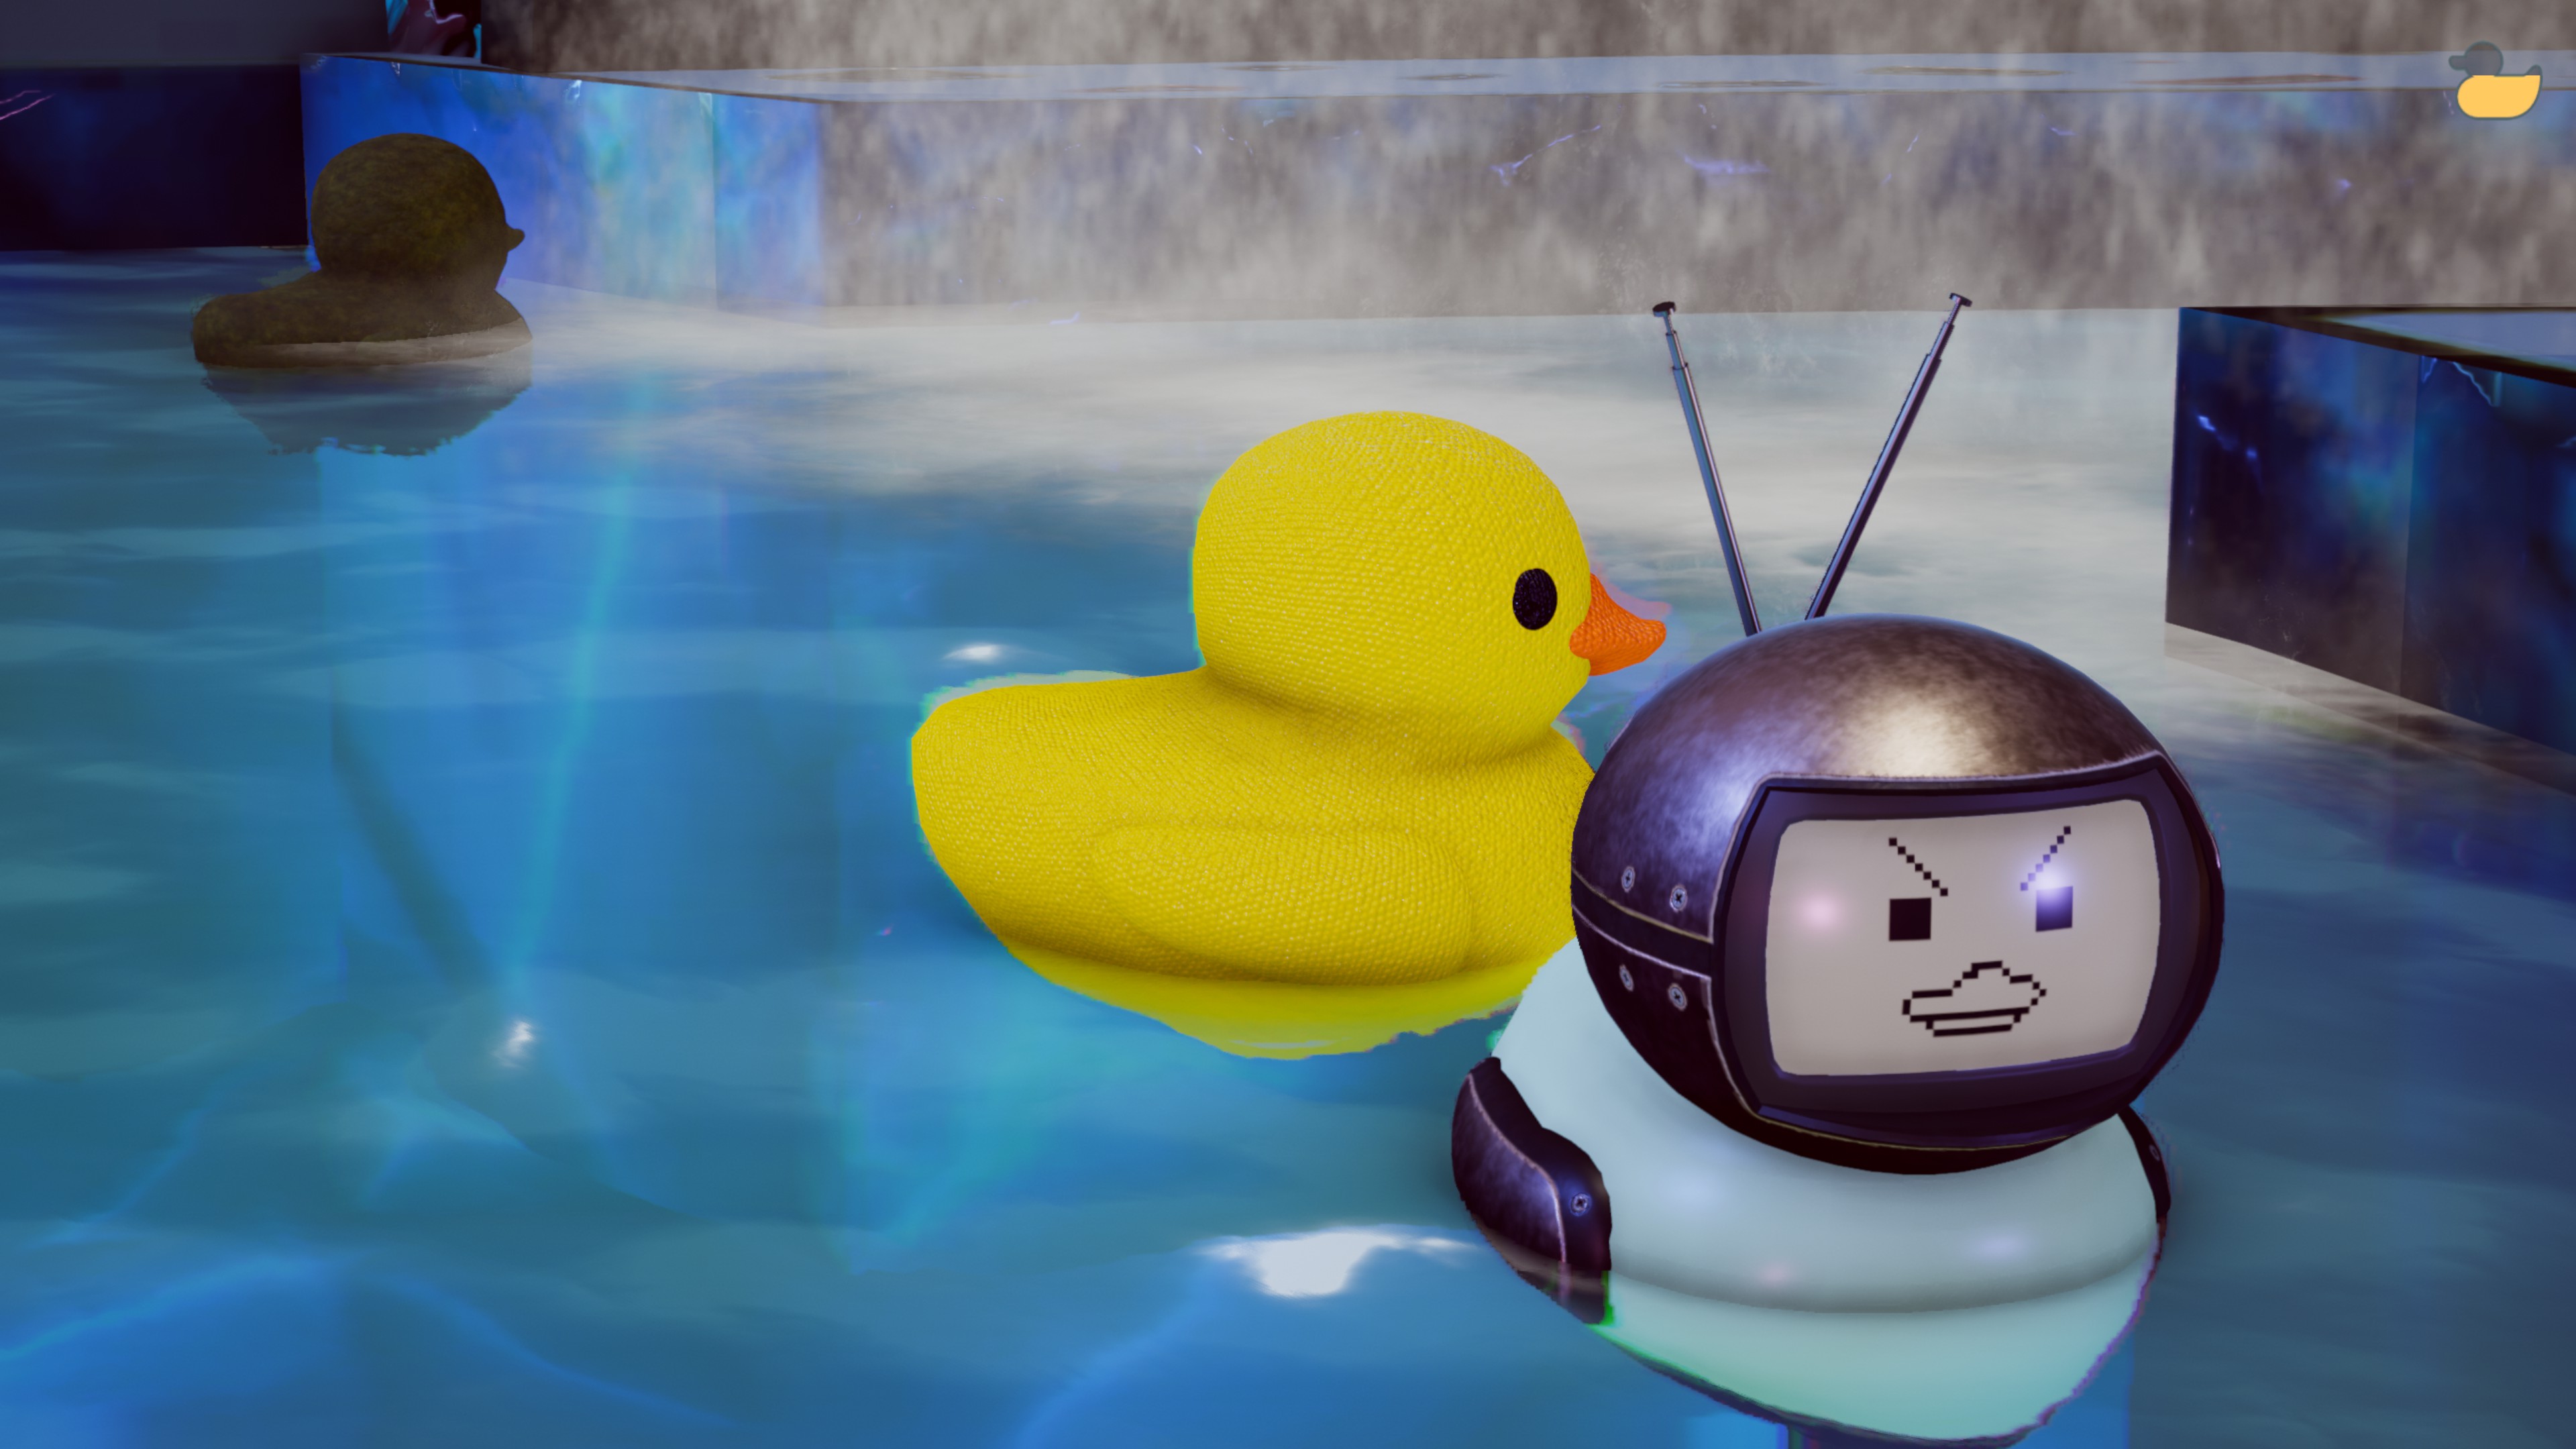 Placid Plastic Duck Simulator - Guide to TV Duck DLC - The Part You Clicked On This Guide For - D70E098